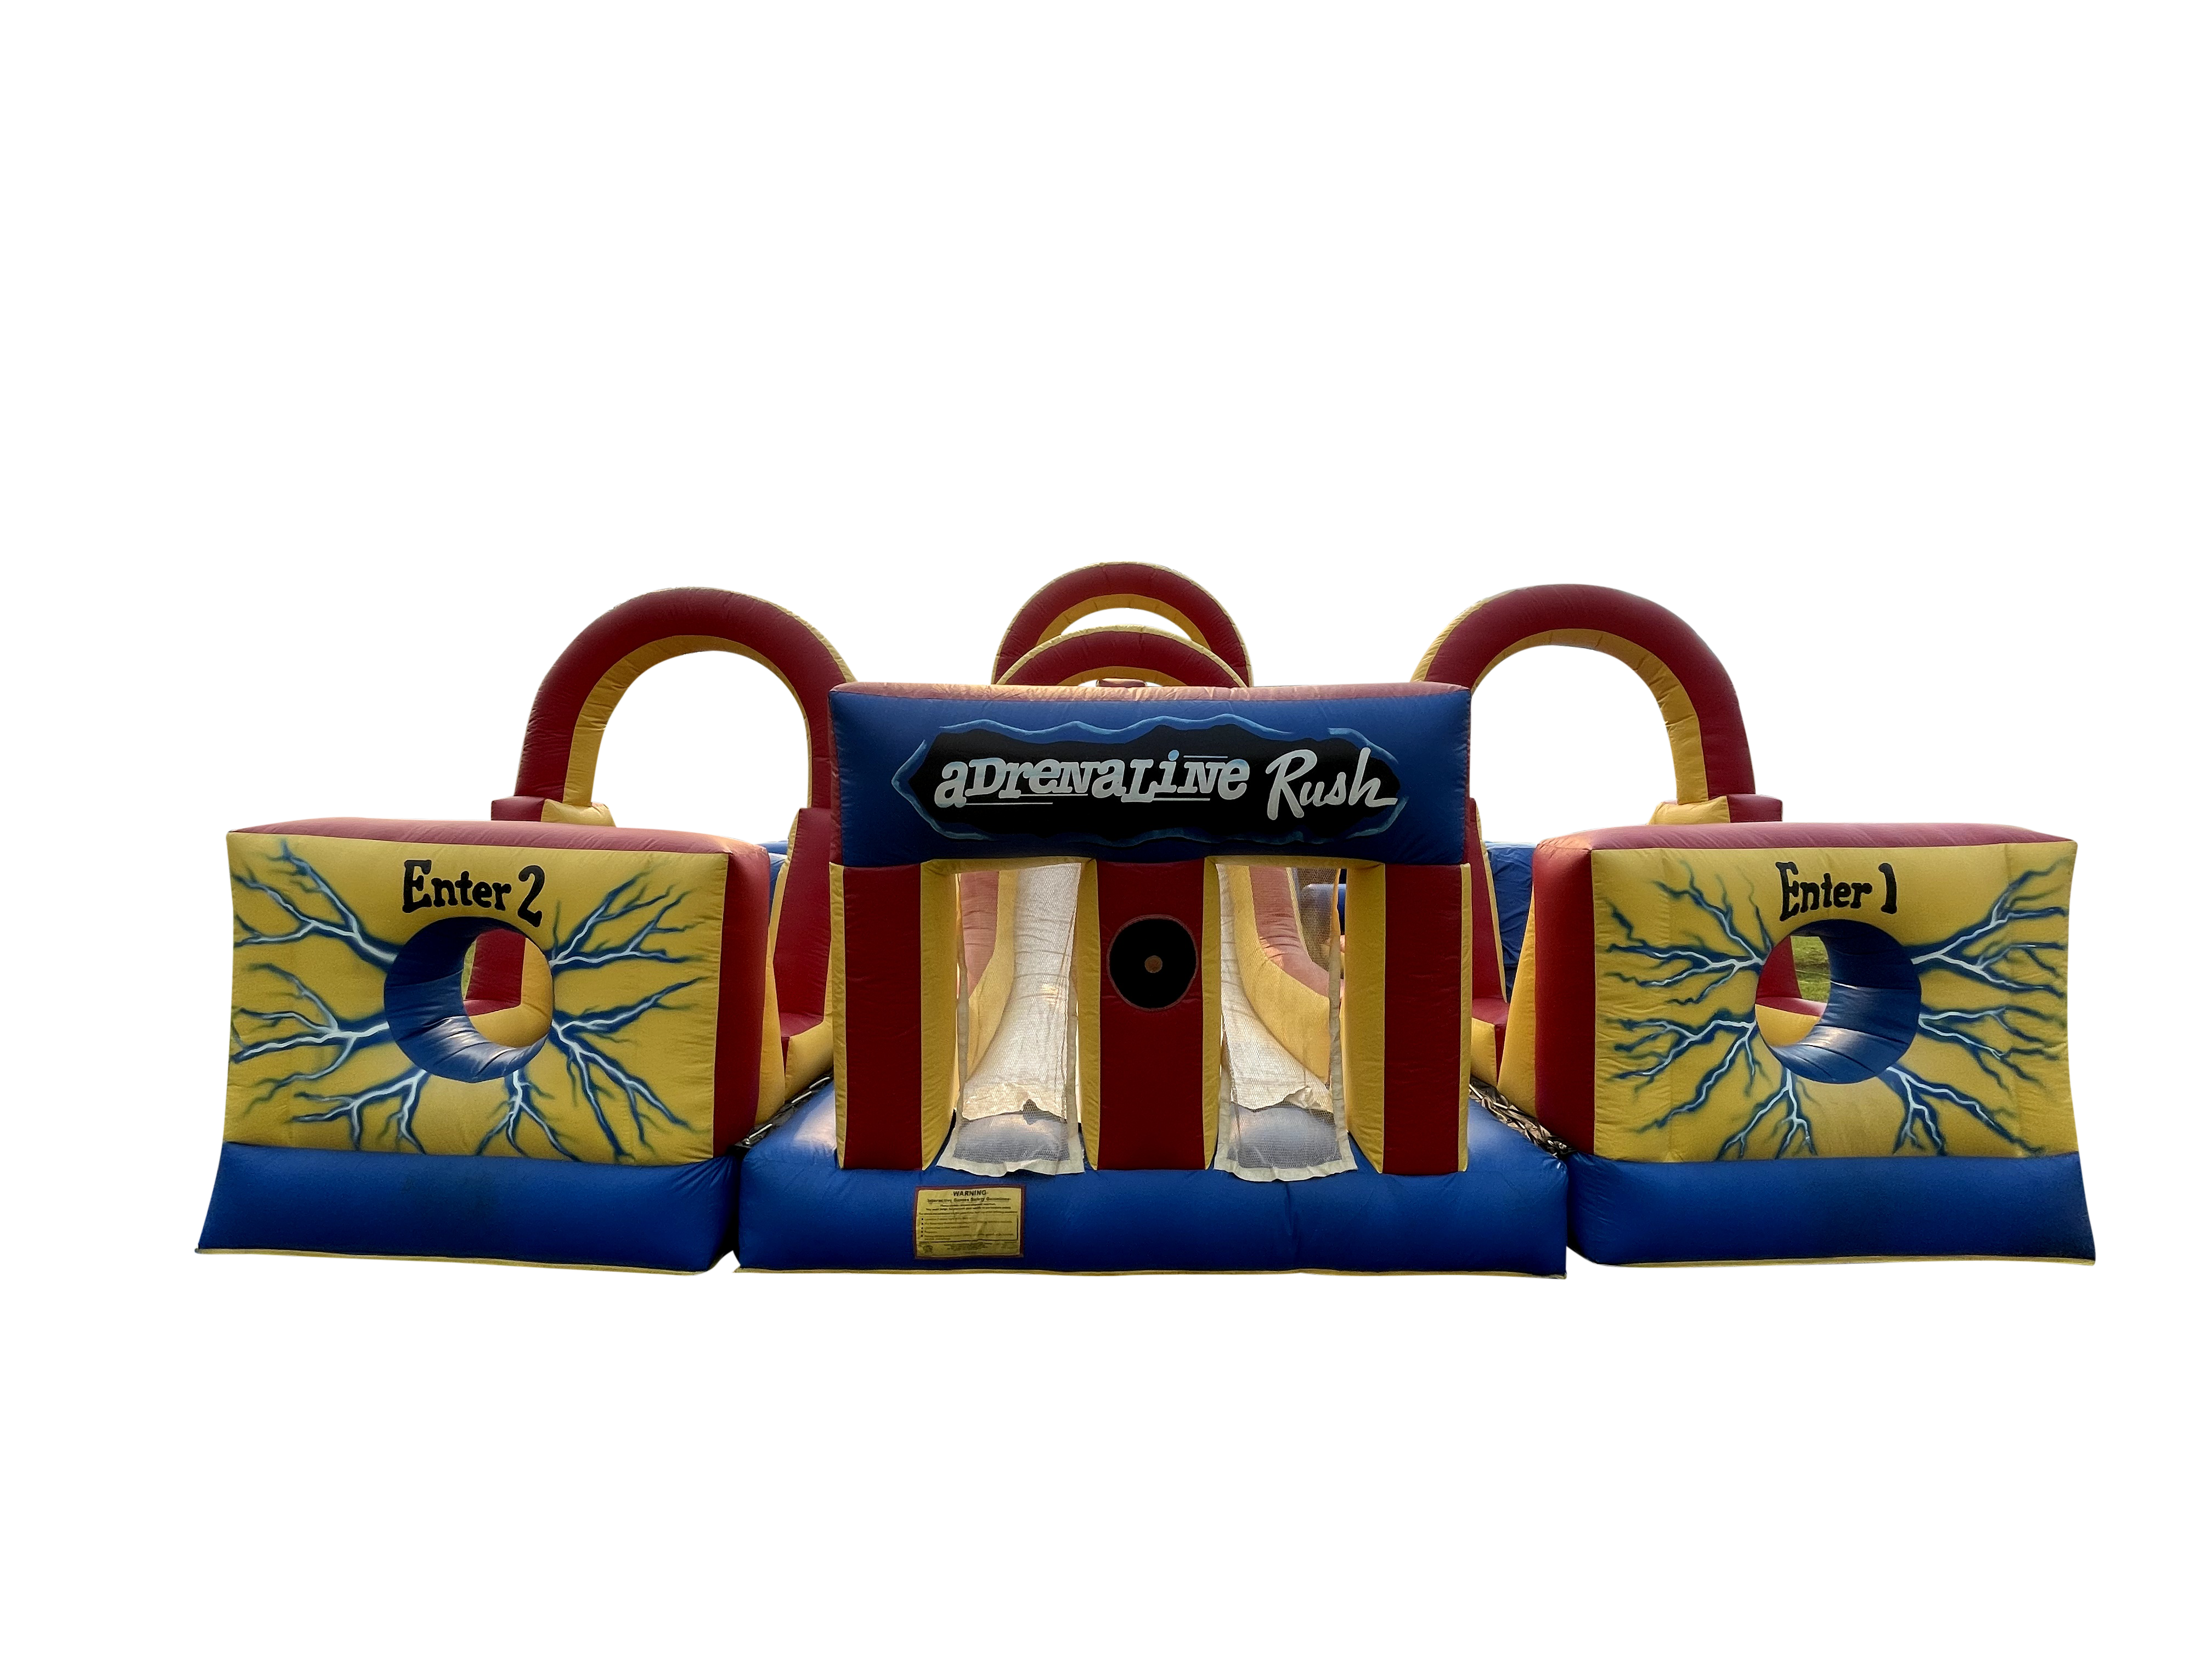 (c) Awesomeinflatablerides.com